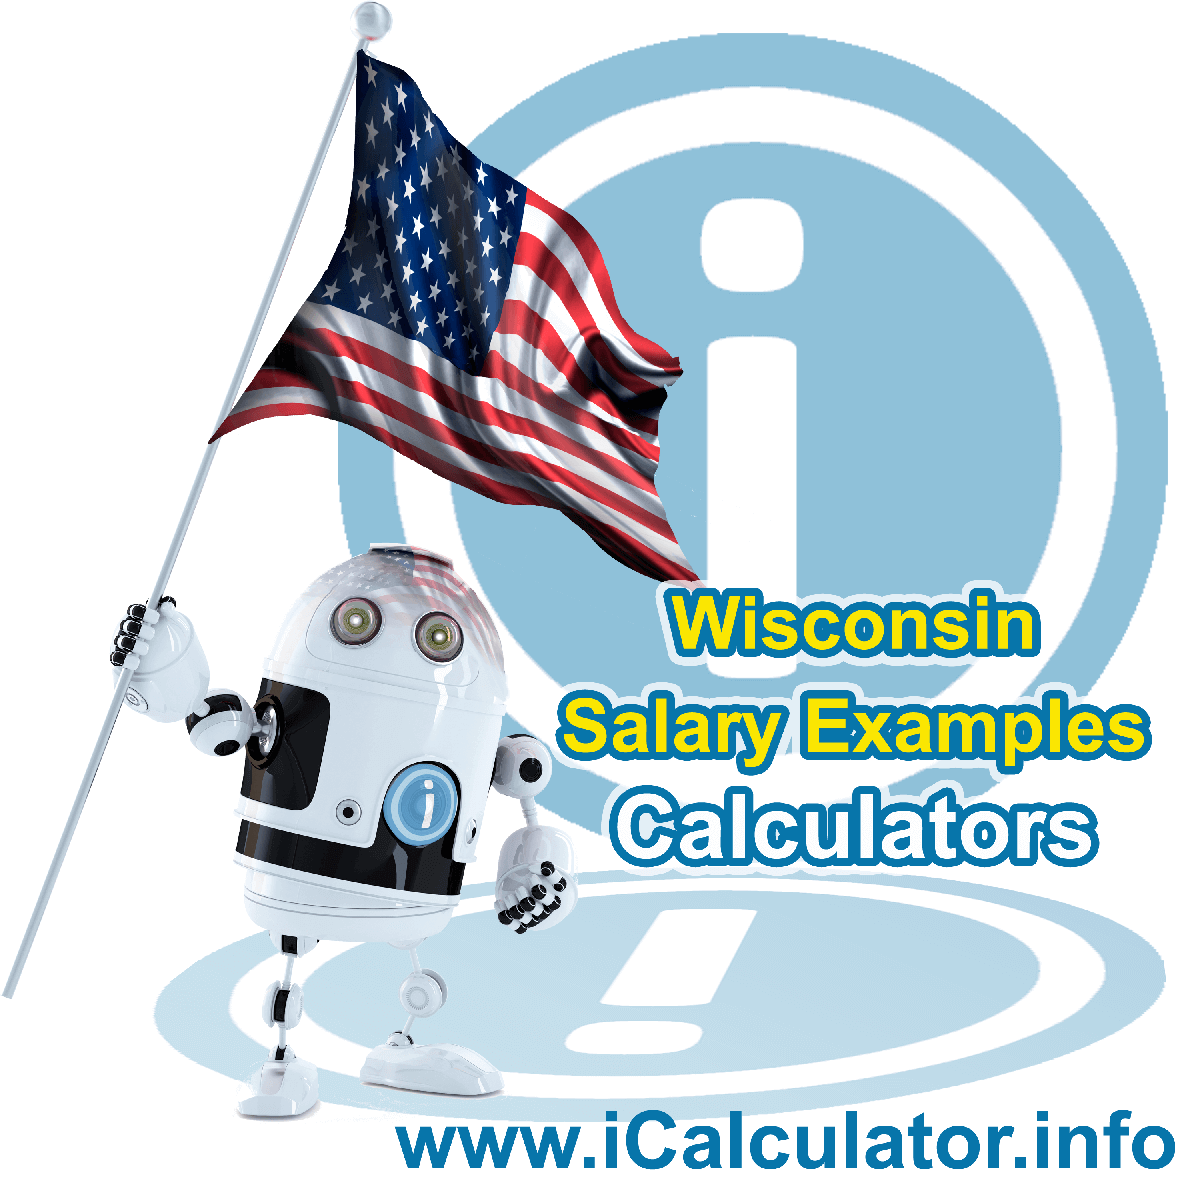 Wisconsin Salary Example for $ 250,000.00 in 2023 | iCalculator™ | $ 250,000.00 salary example for employee and employer paying Wisconsin State tincome taxes. Detailed salary after tax calculation including Wisconsin State Tax, Federal State Tax, Medicare Deductions, Social Security, Capital Gains and other income tax and salary deductions complete with supporting Wisconsin state tax tables 